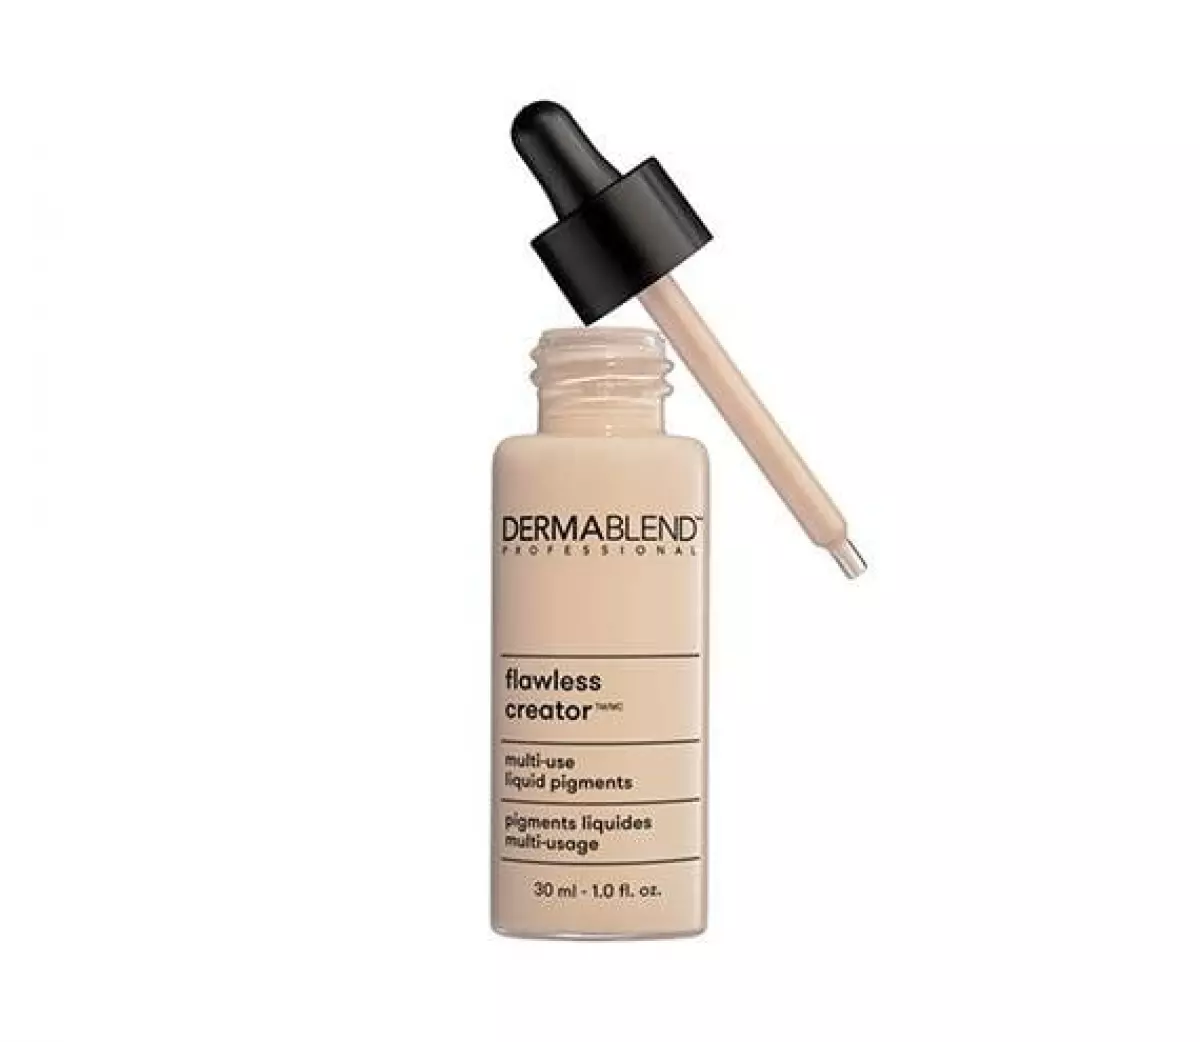 We Tried All of the Dermablend Foundations — Here Are Our Thoughts